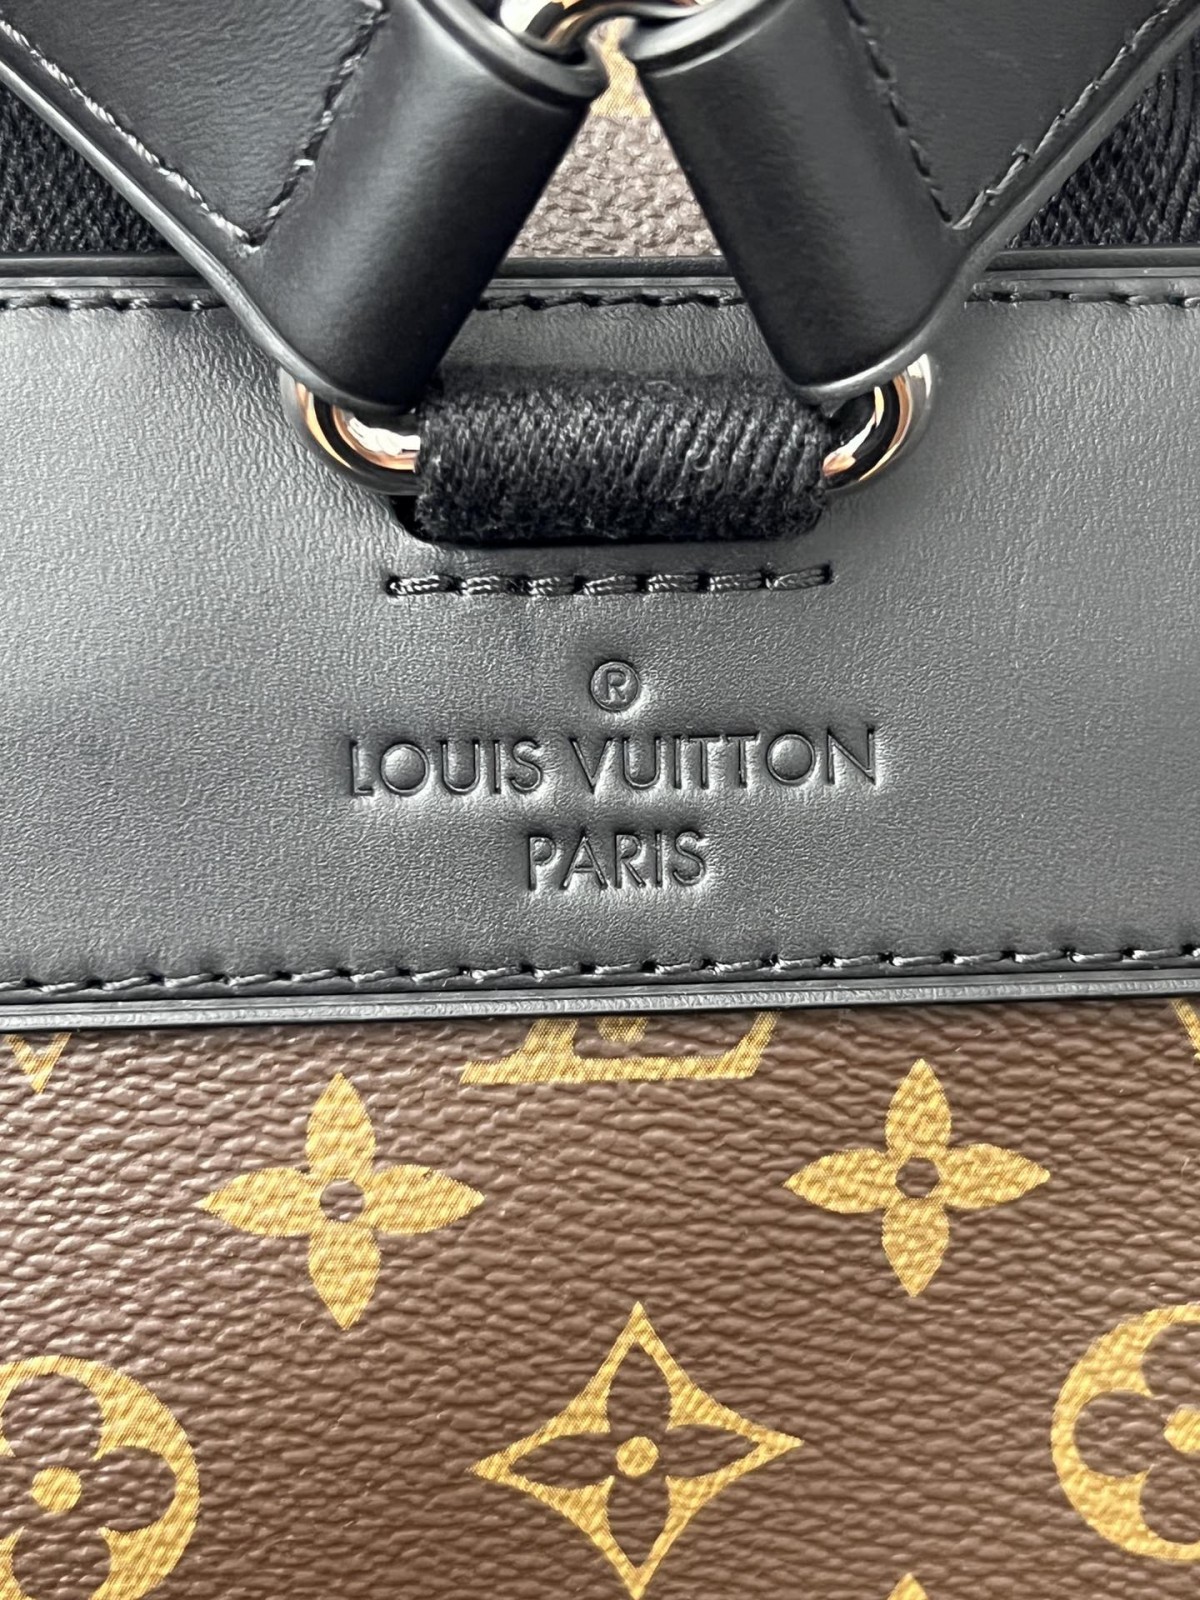 The Louis Vuitton Christopher Backpack: A Remarkable Replication by Shebag Company (2023 Week 43)-Best Quality adịgboroja Louis vuitton akpa Online Store, oyiri mmebe akpa ru